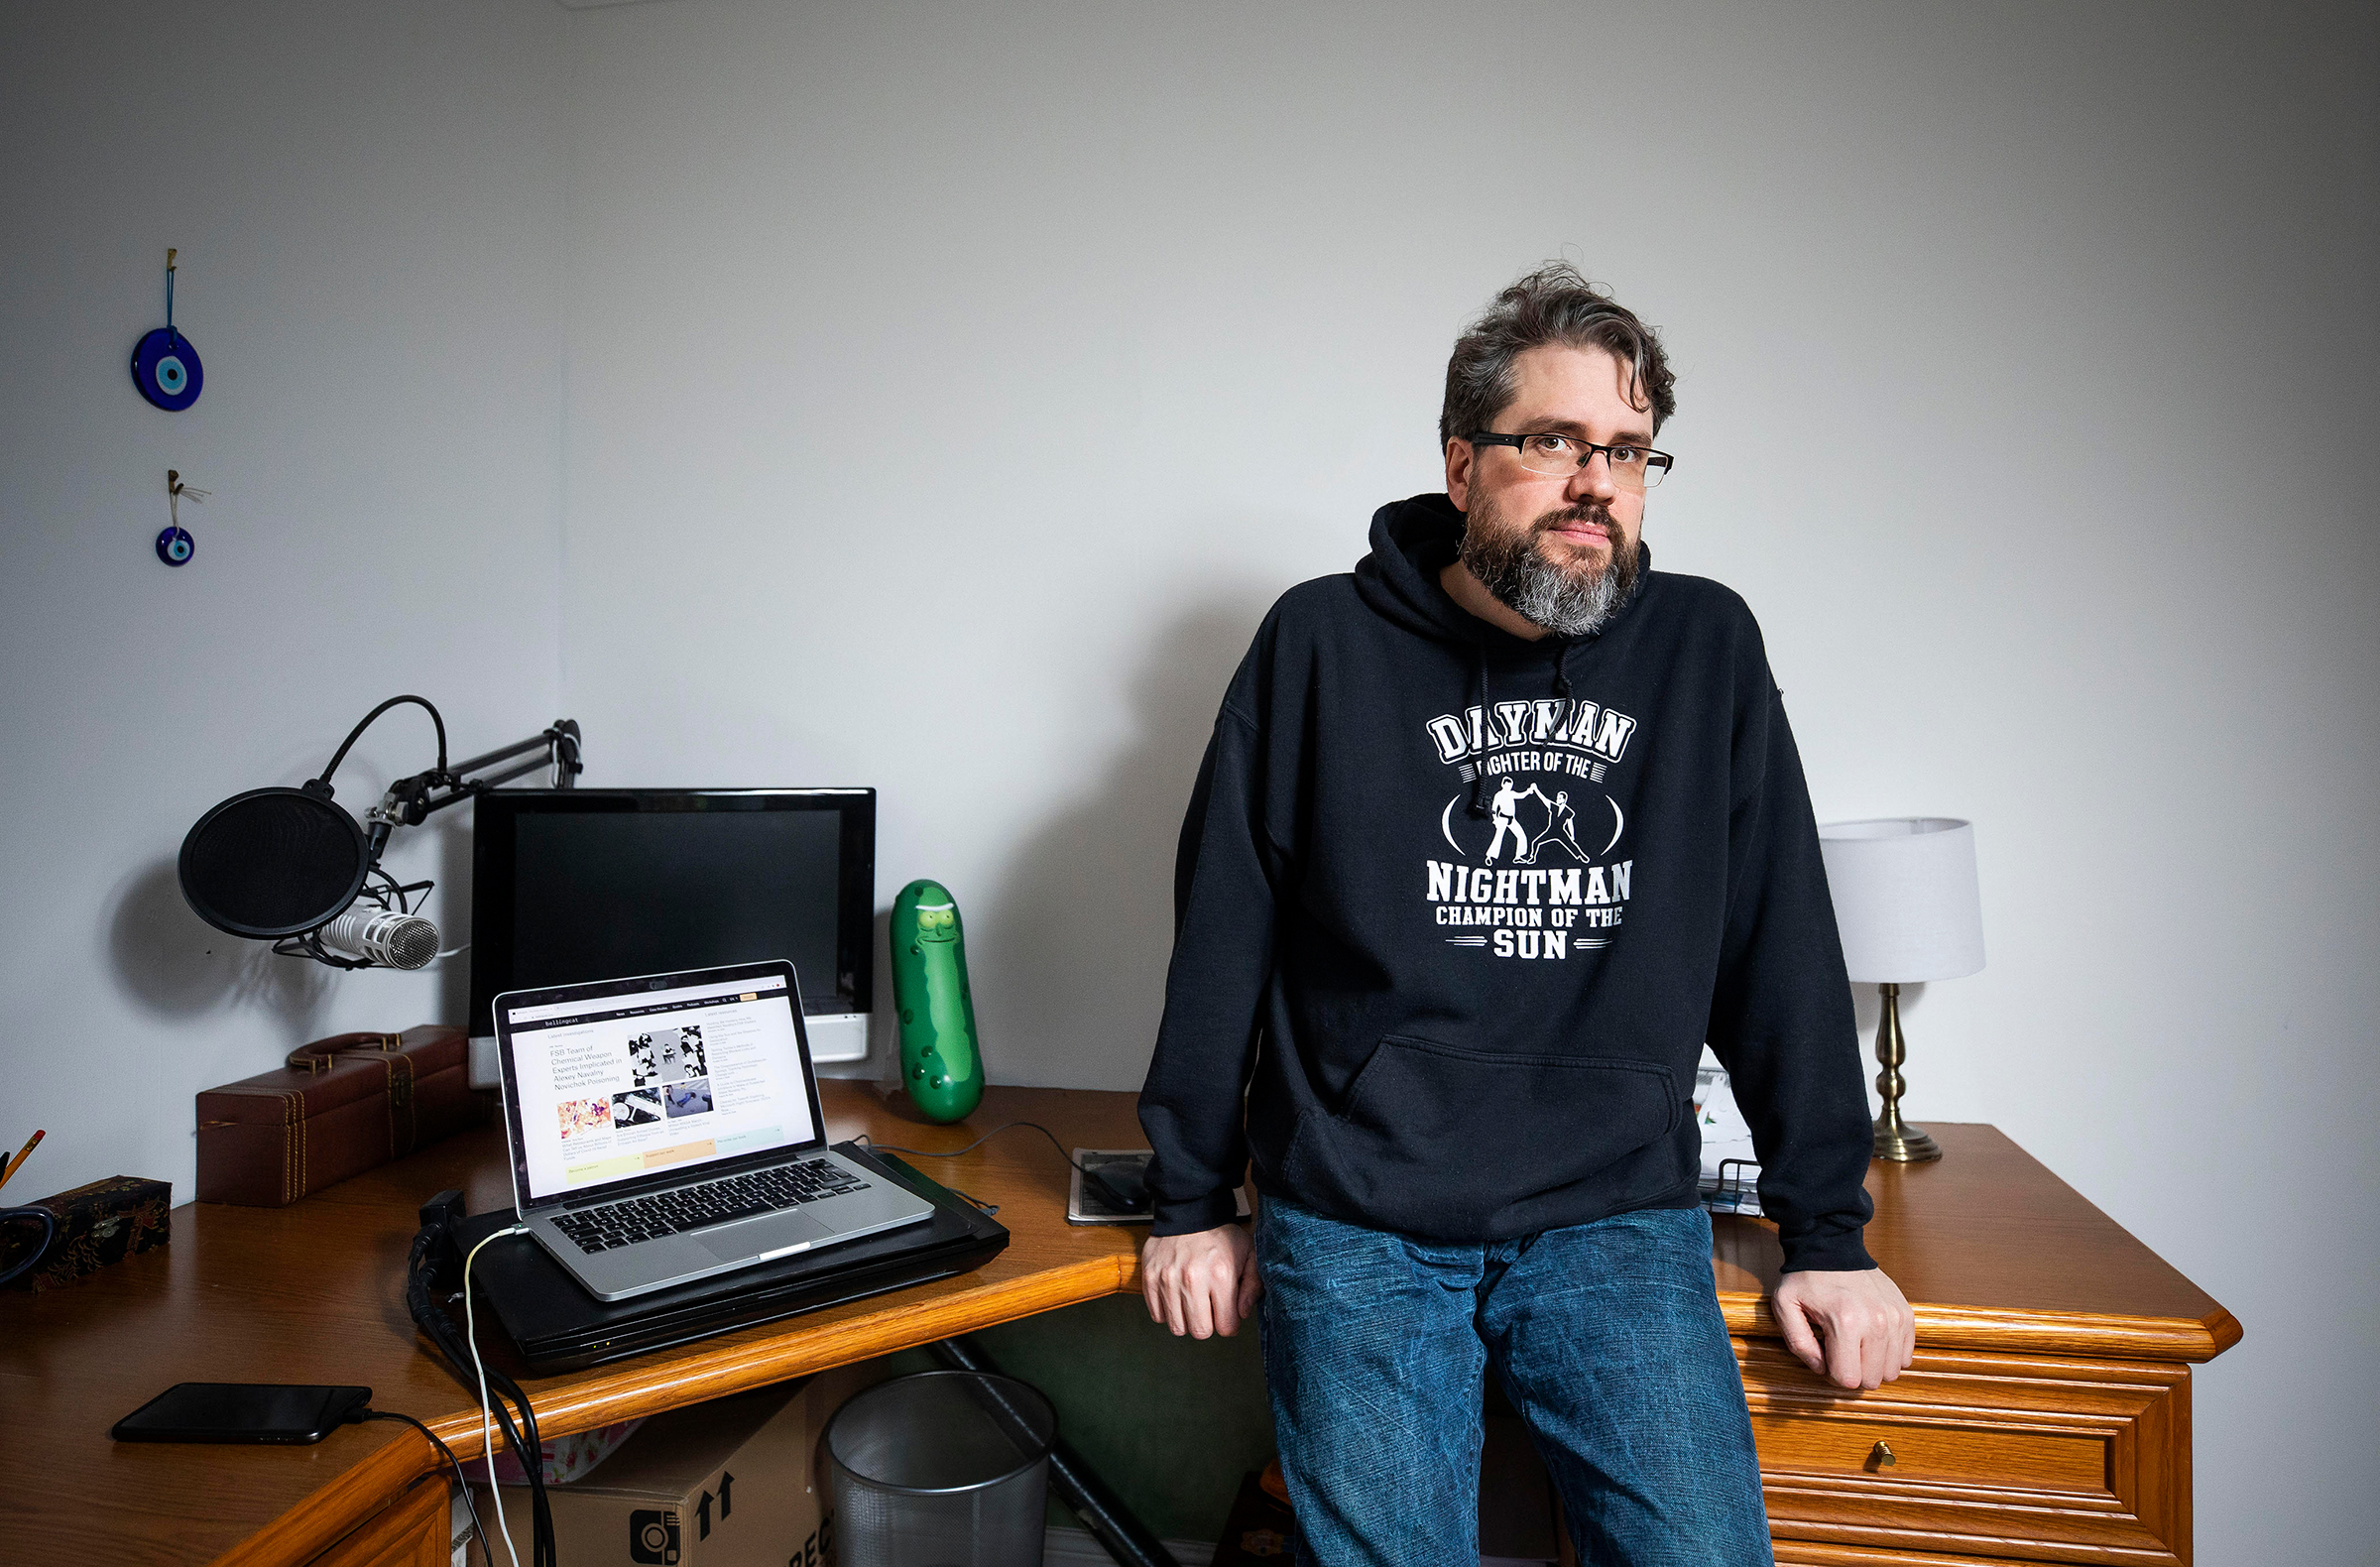 Eliot Higgins at home in Leicester. Higgins started up Bellingcat, a website known for using open-sources and social media for investigations. (Fabio De Paola—Guardian/eyevine/Redux)